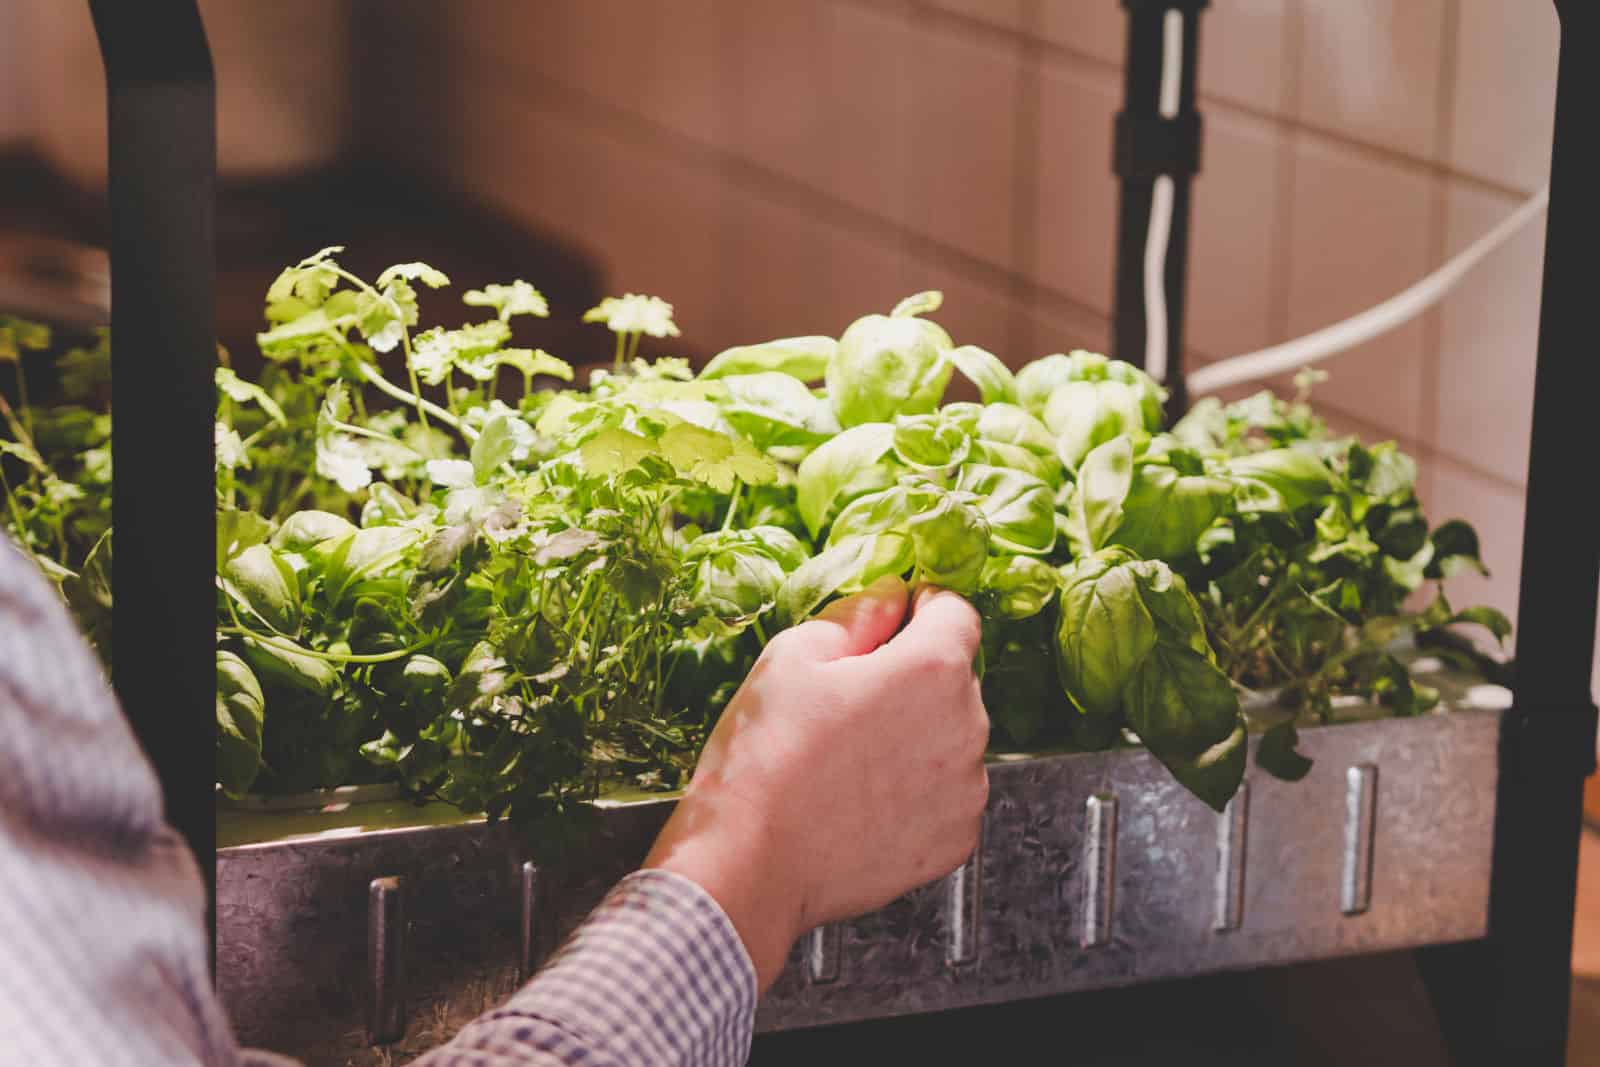 person harvesting herbs and vegetables indoors using home hydroponics